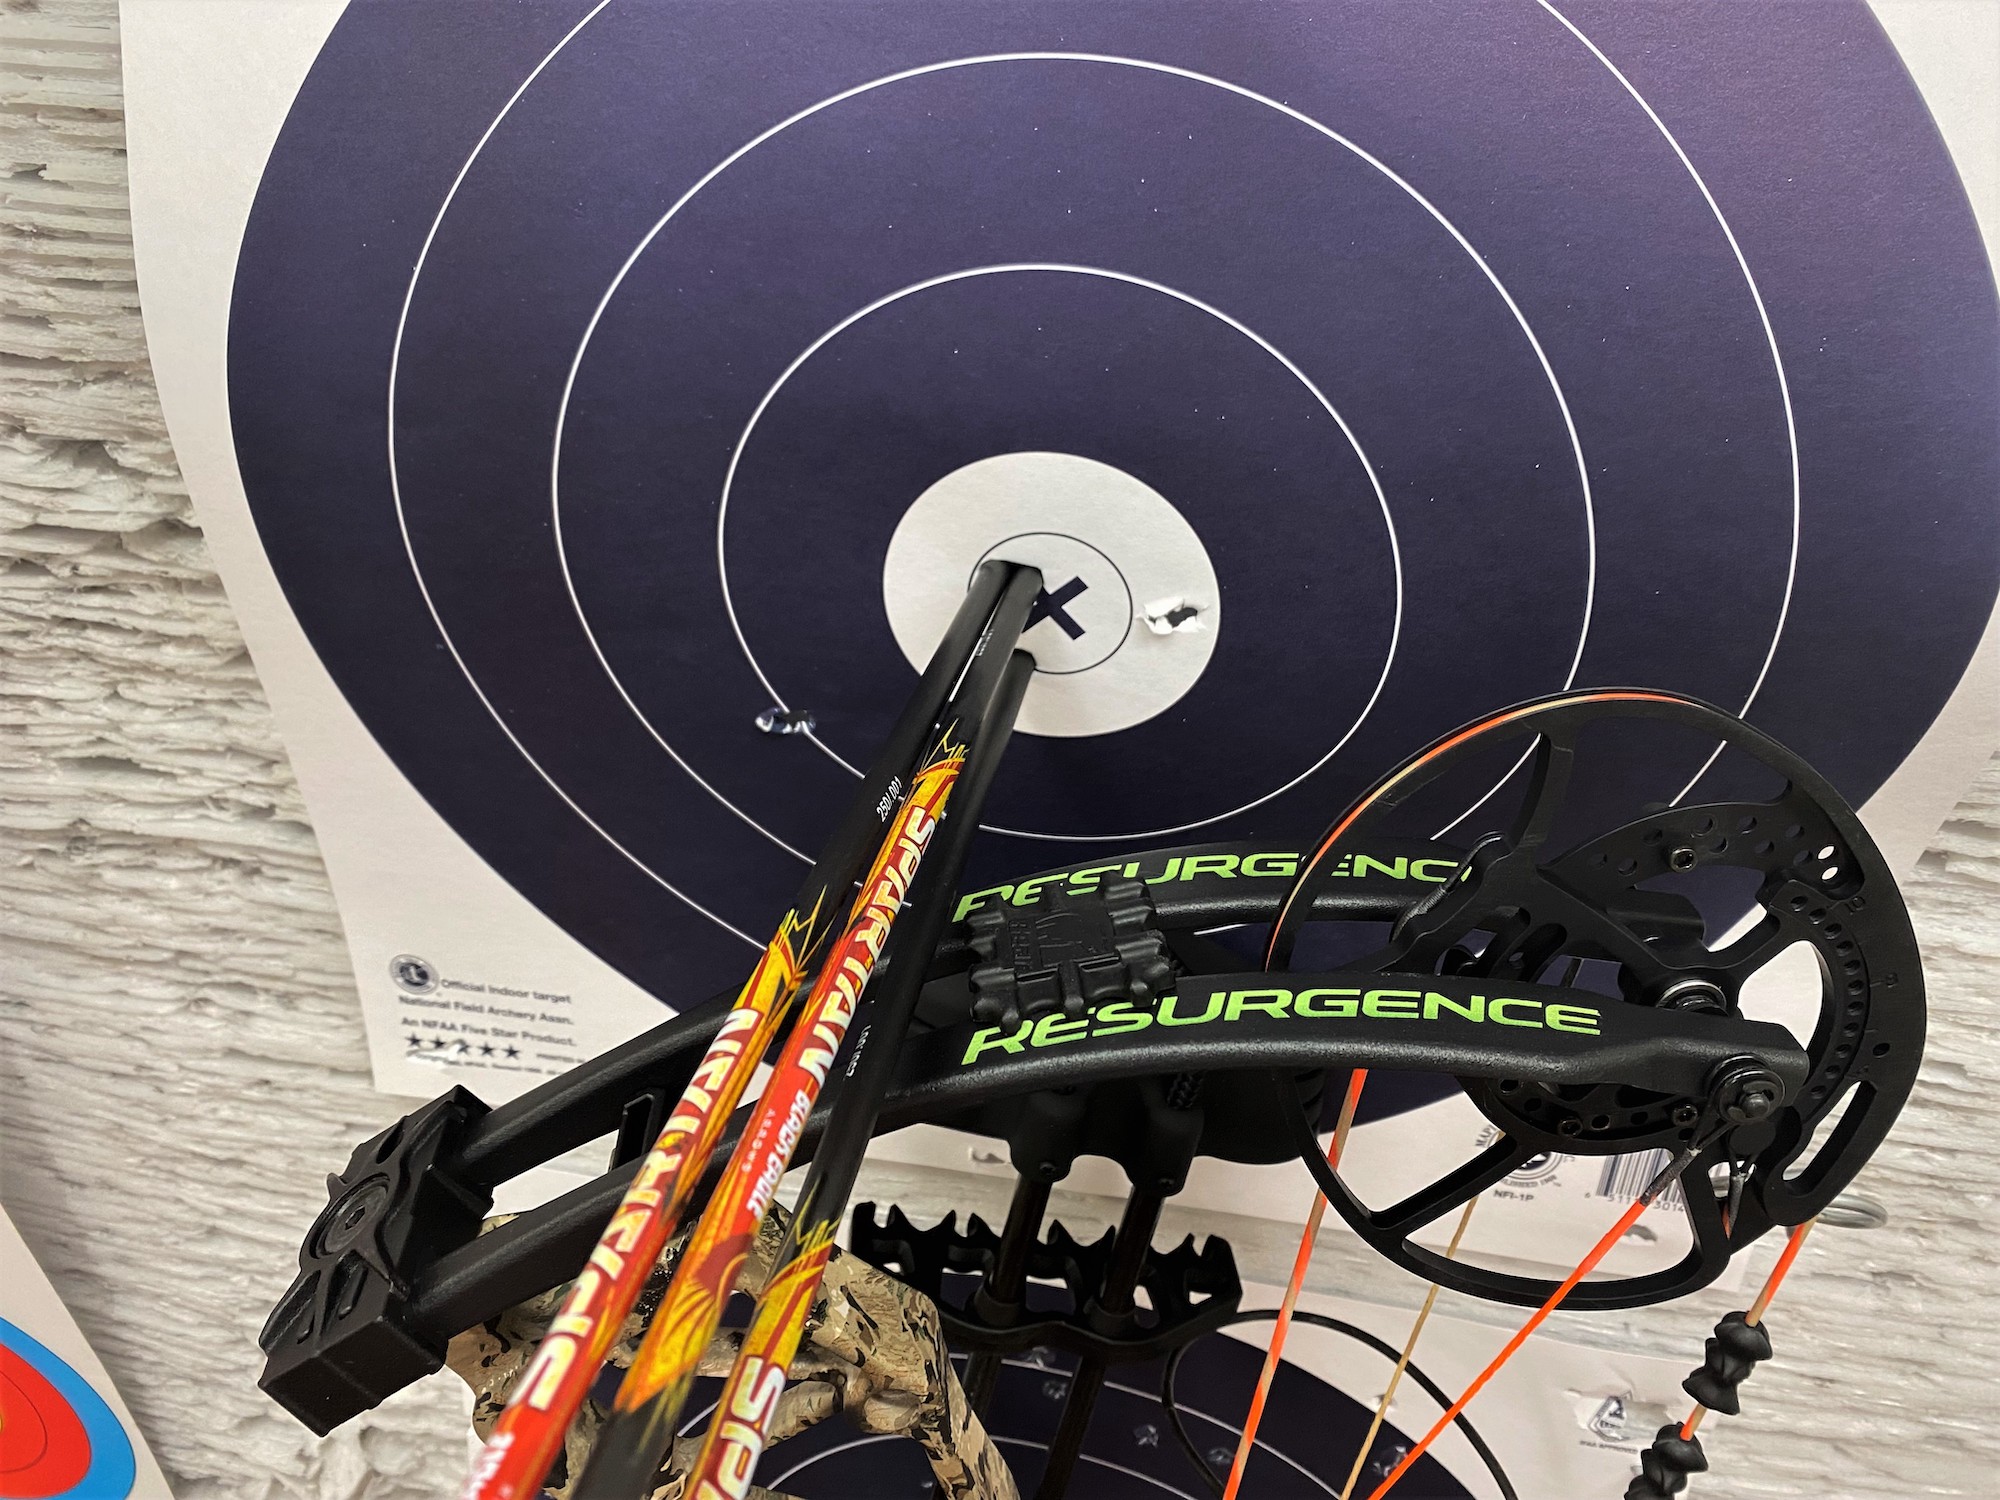 Three arrows in the bullseye of a target with a bow next to the target